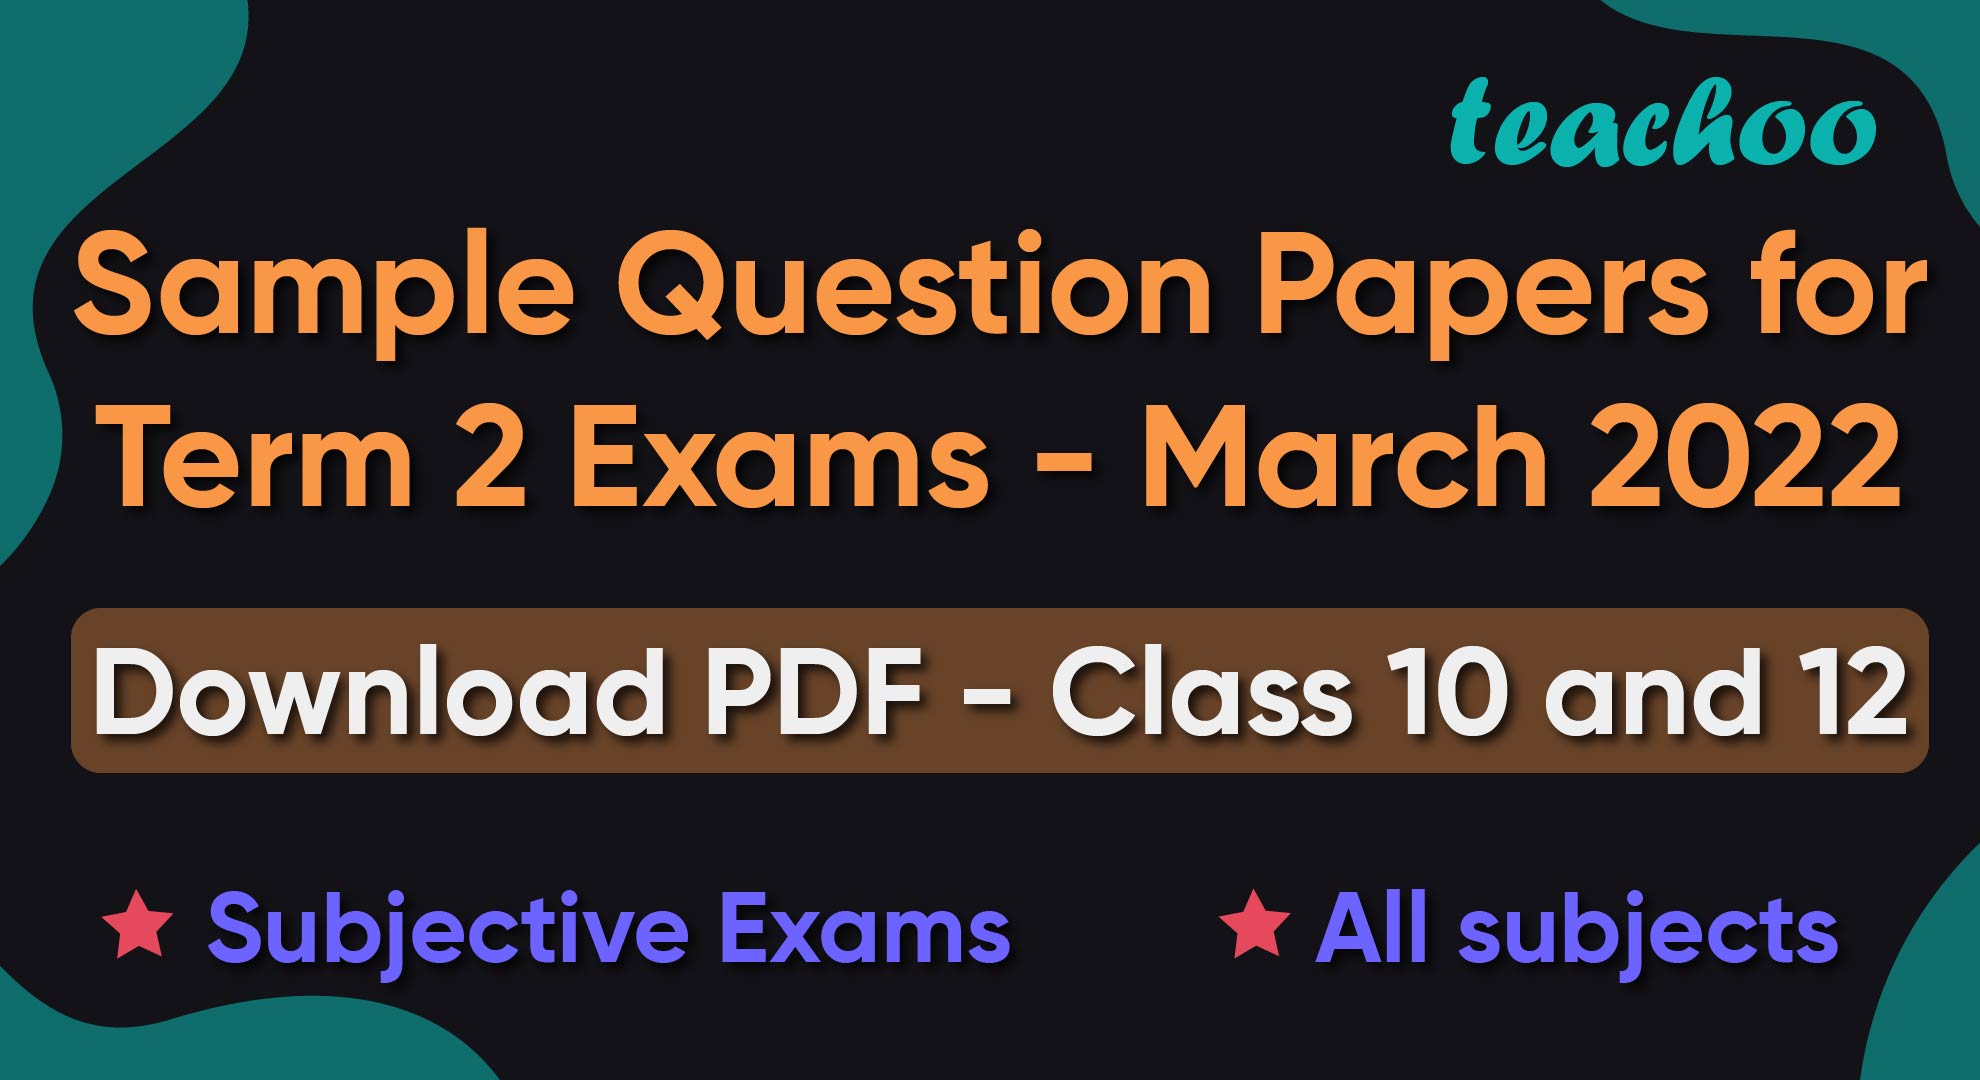 CCBSE Sample Question Papers for Term 1 Exams 2021-22